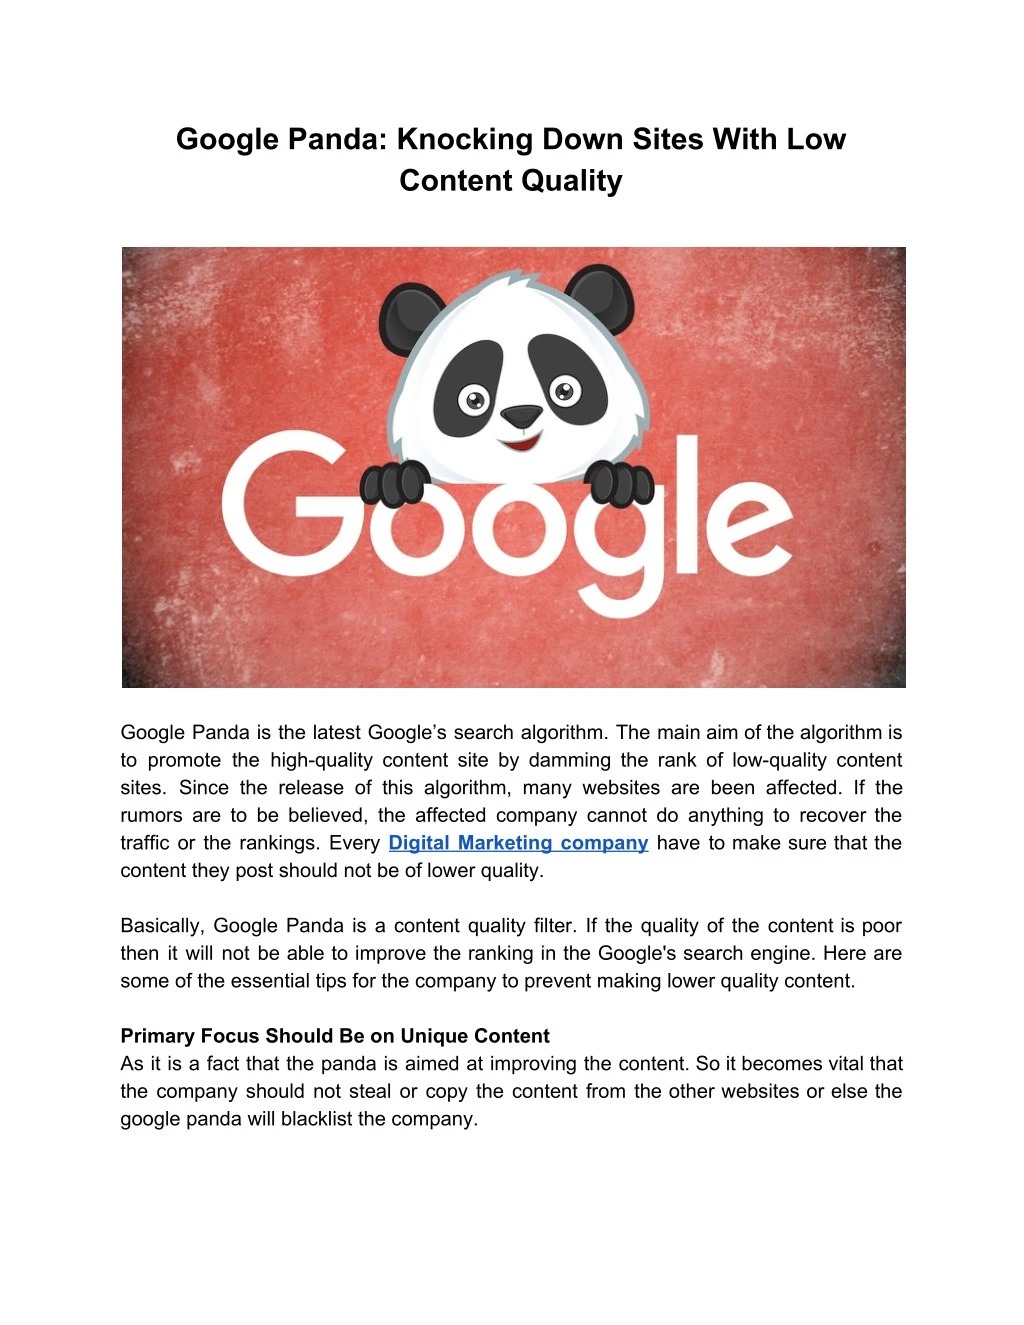 google panda knocking down sites with low content